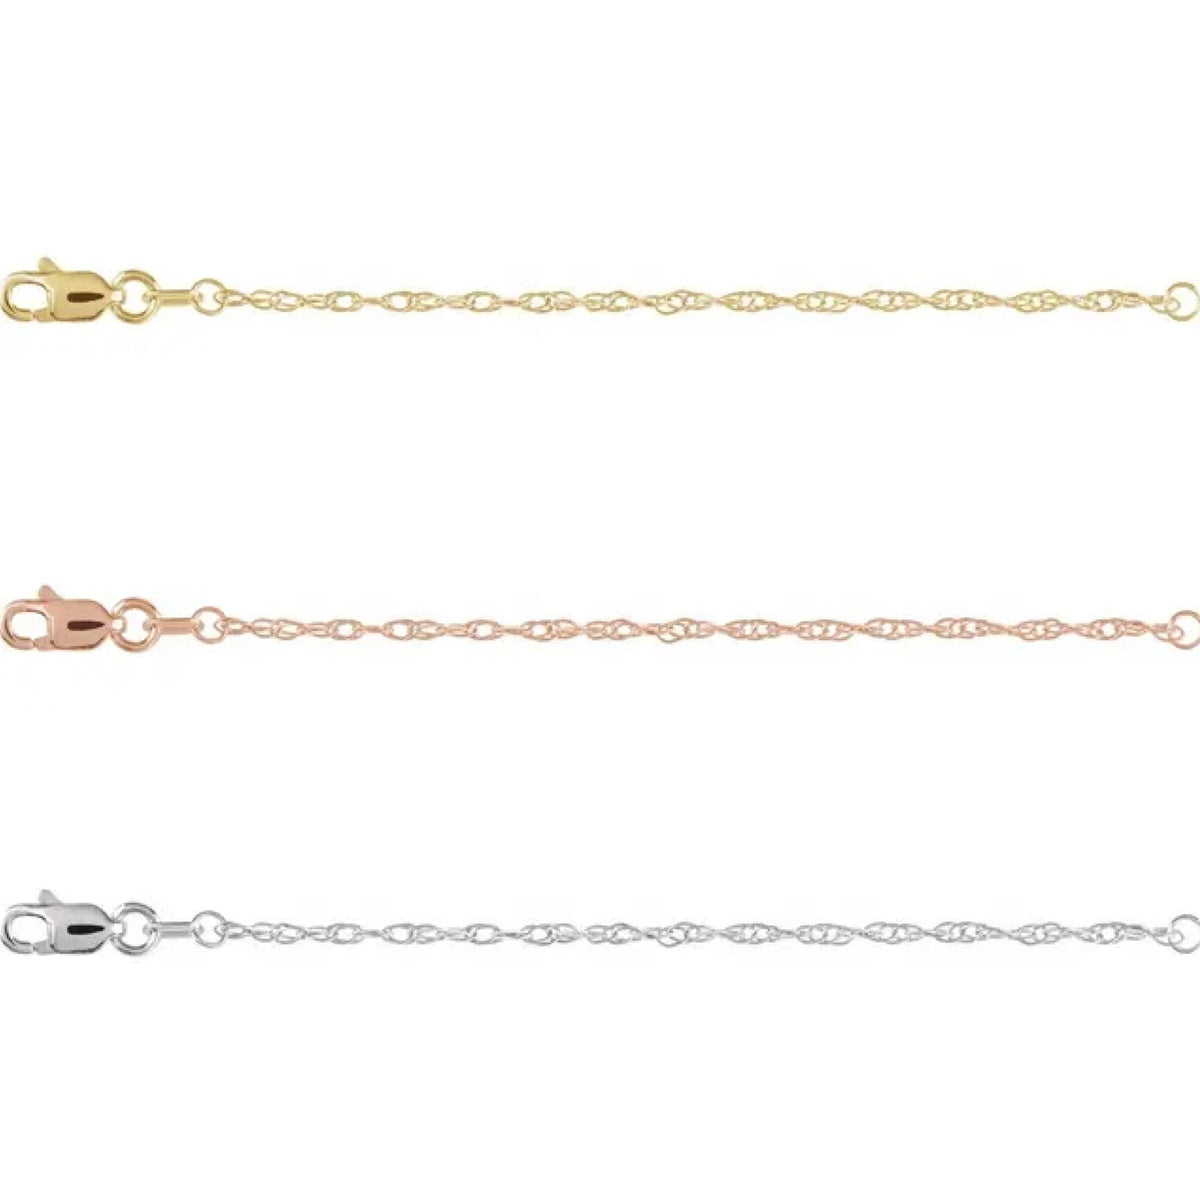 14k White Gold 3 Inch Chain Necklace Extender 